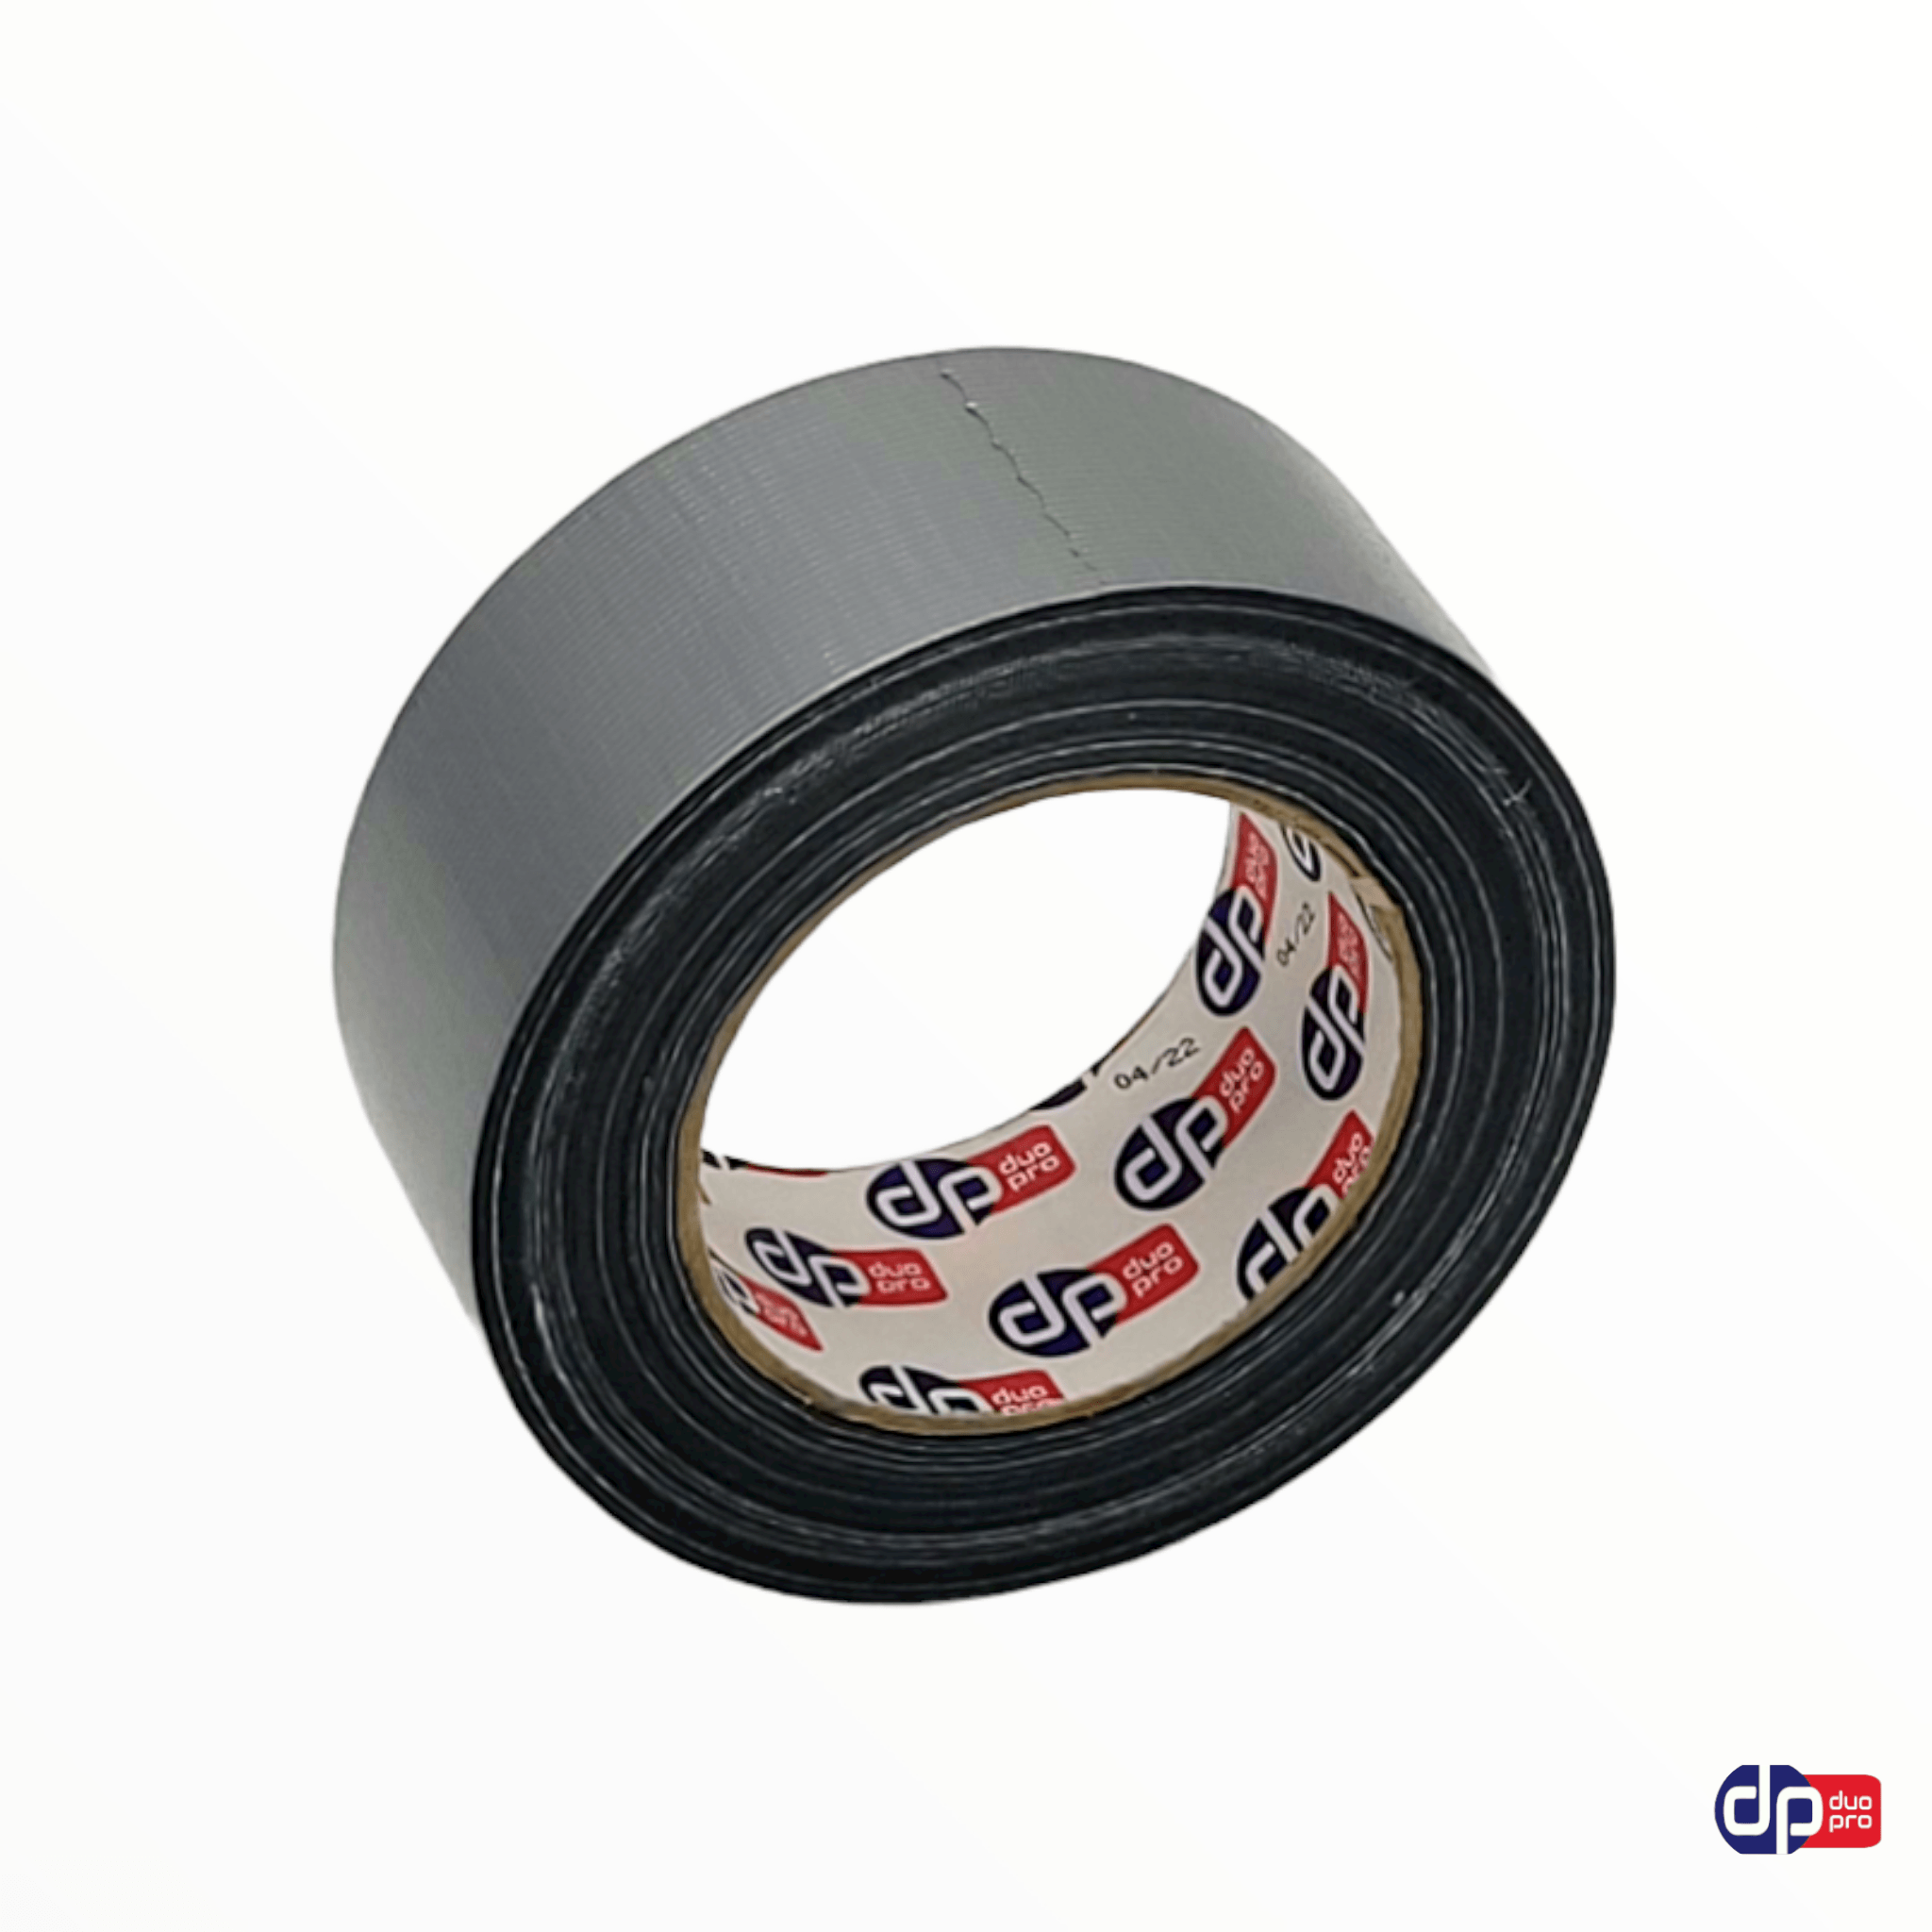 DT-300 Ducttape zilver [Allround] - Duopro.nl